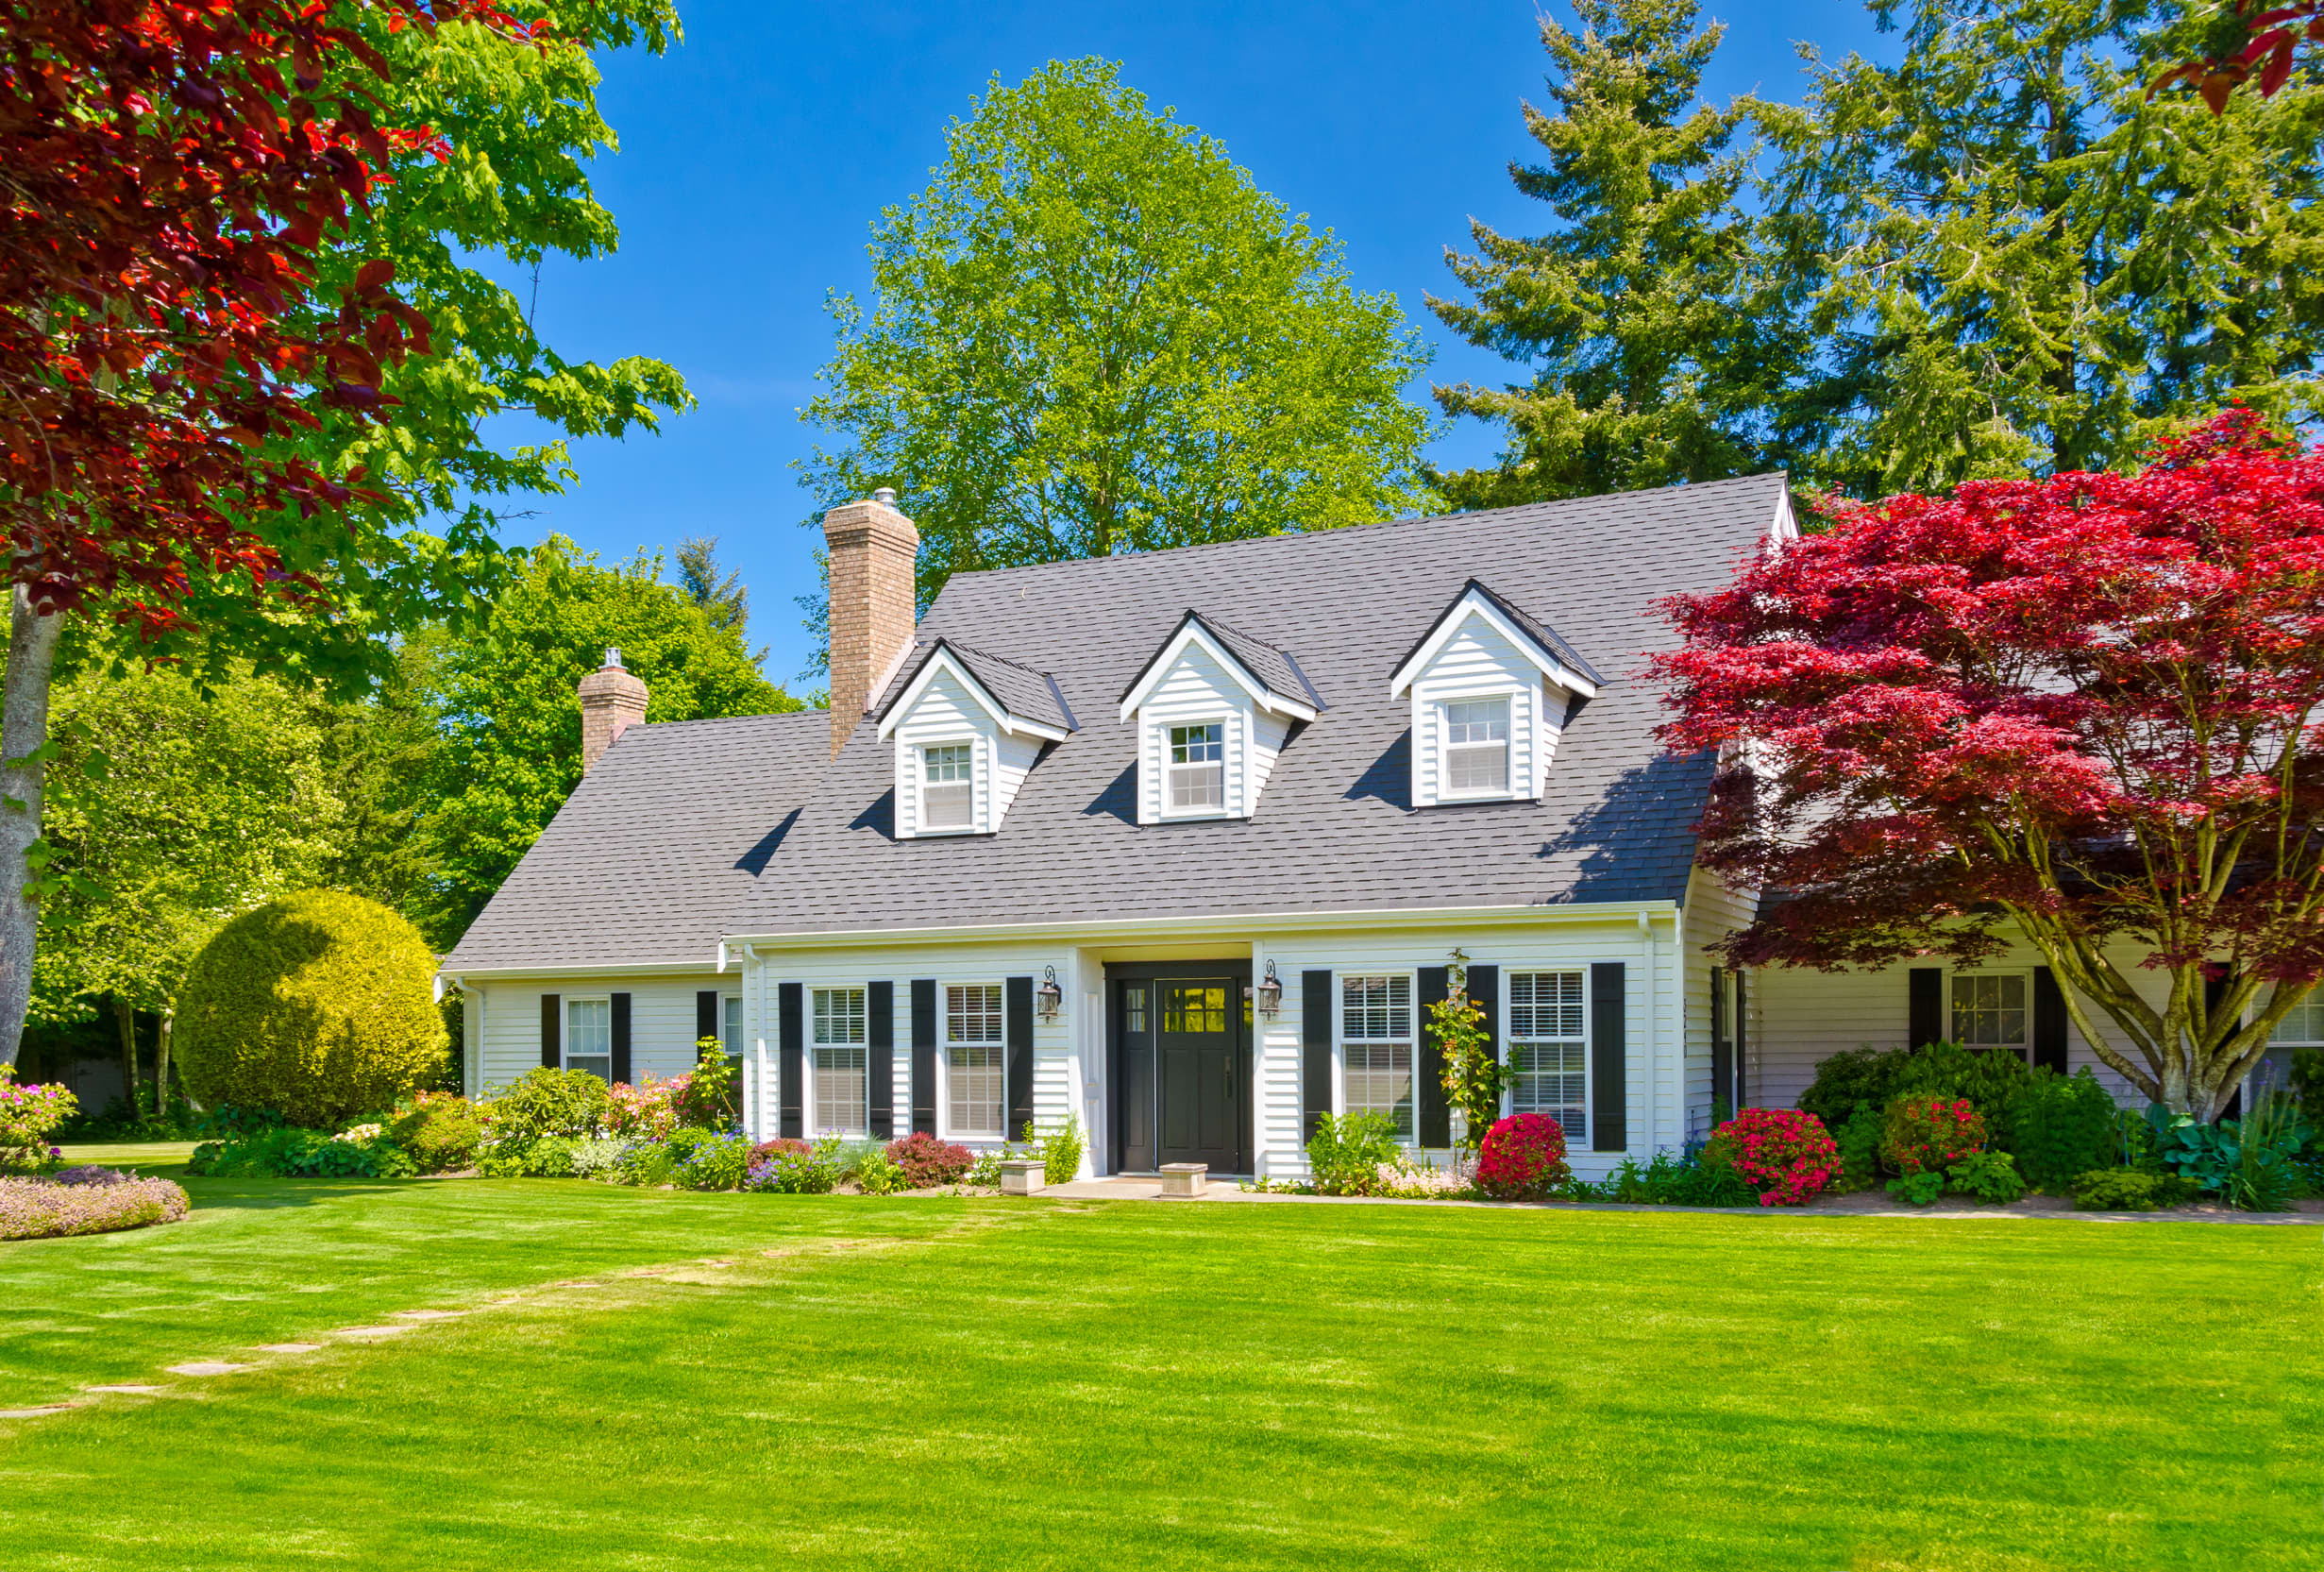 27 Types of Houses - Find Your Perfect Home Type